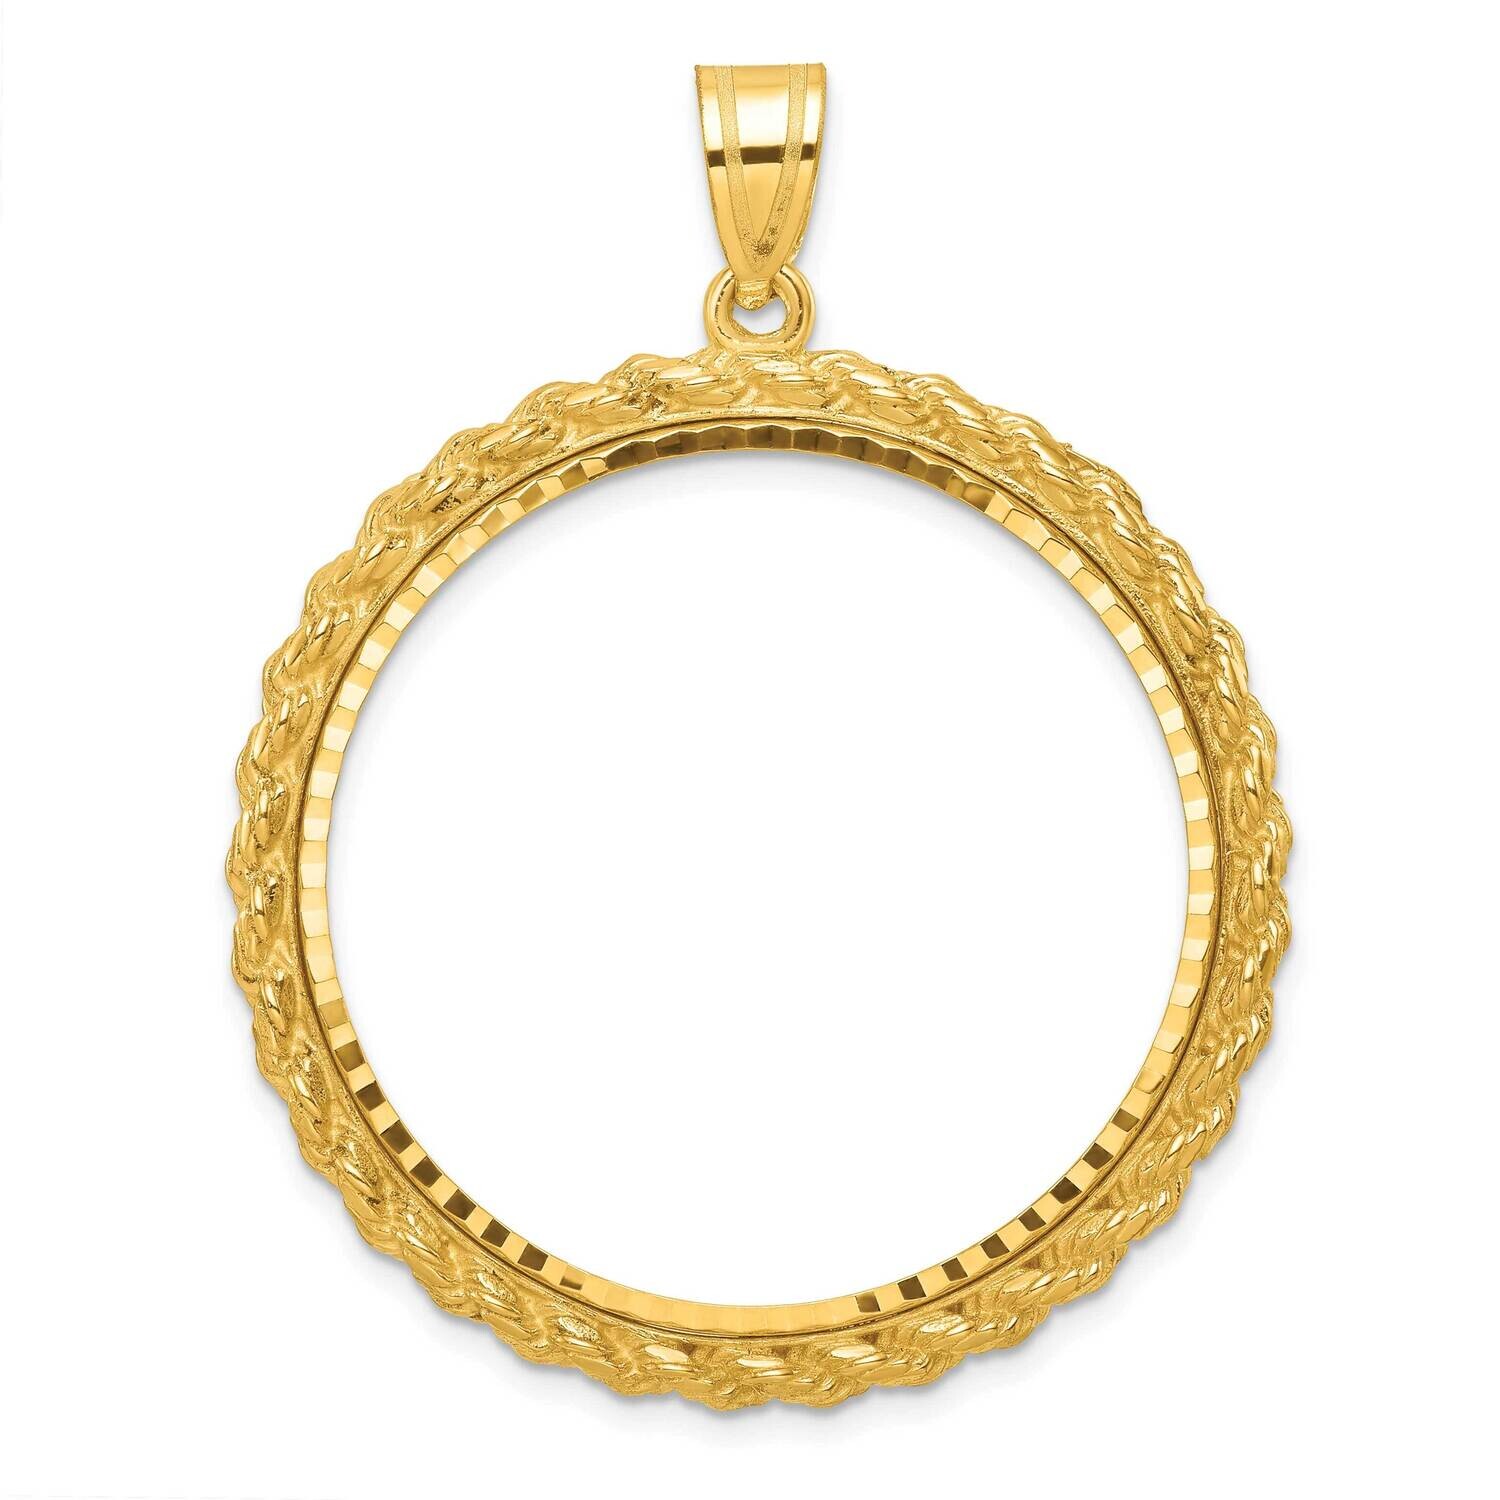 Diamond-Cut Casted Rope Prong 32.0mm Coin Bezel Pendant 14k Gold C8186/32.0